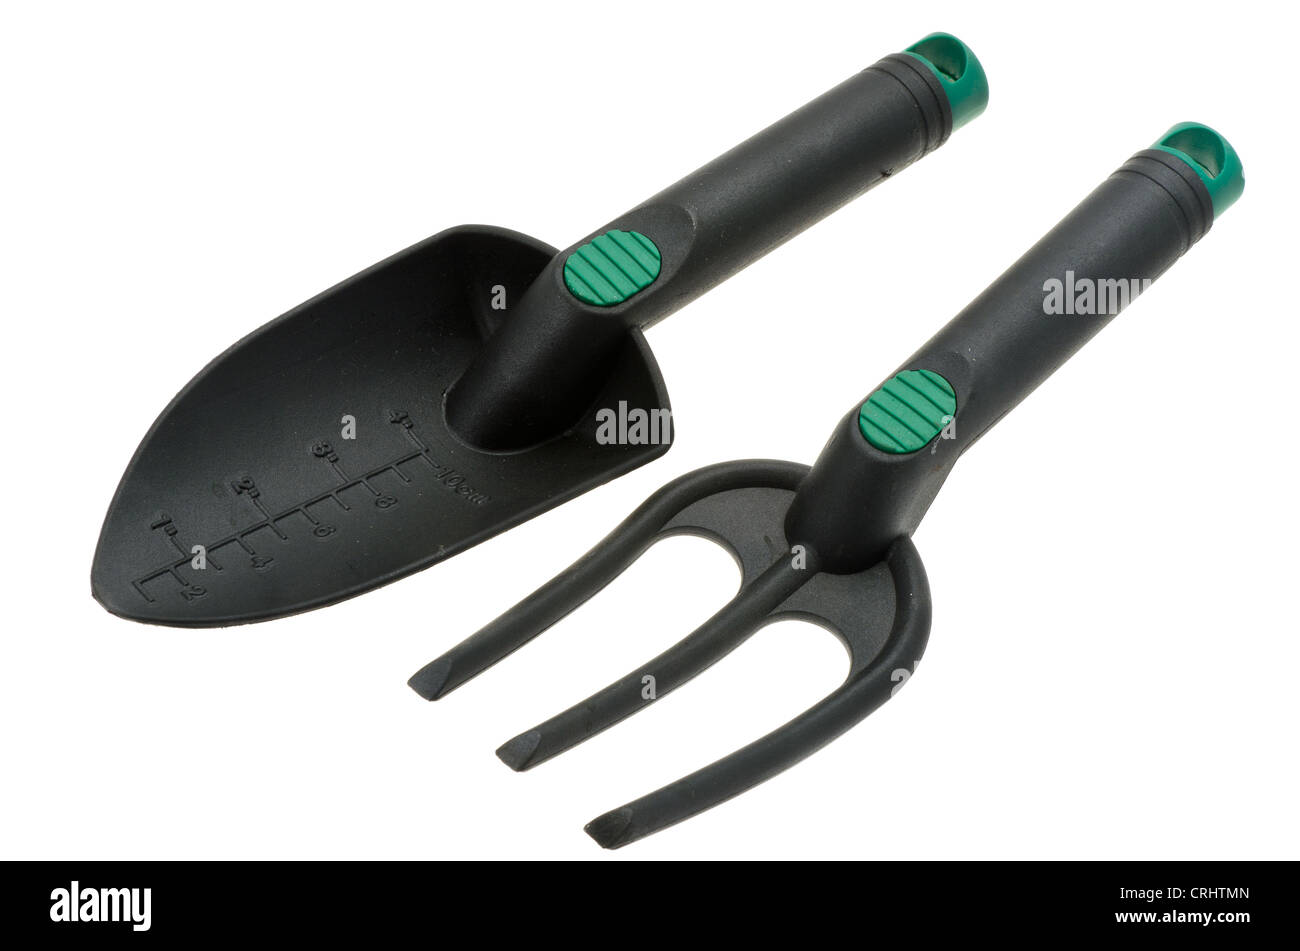 Gardening tools - hand trowel and fork Stock Photo